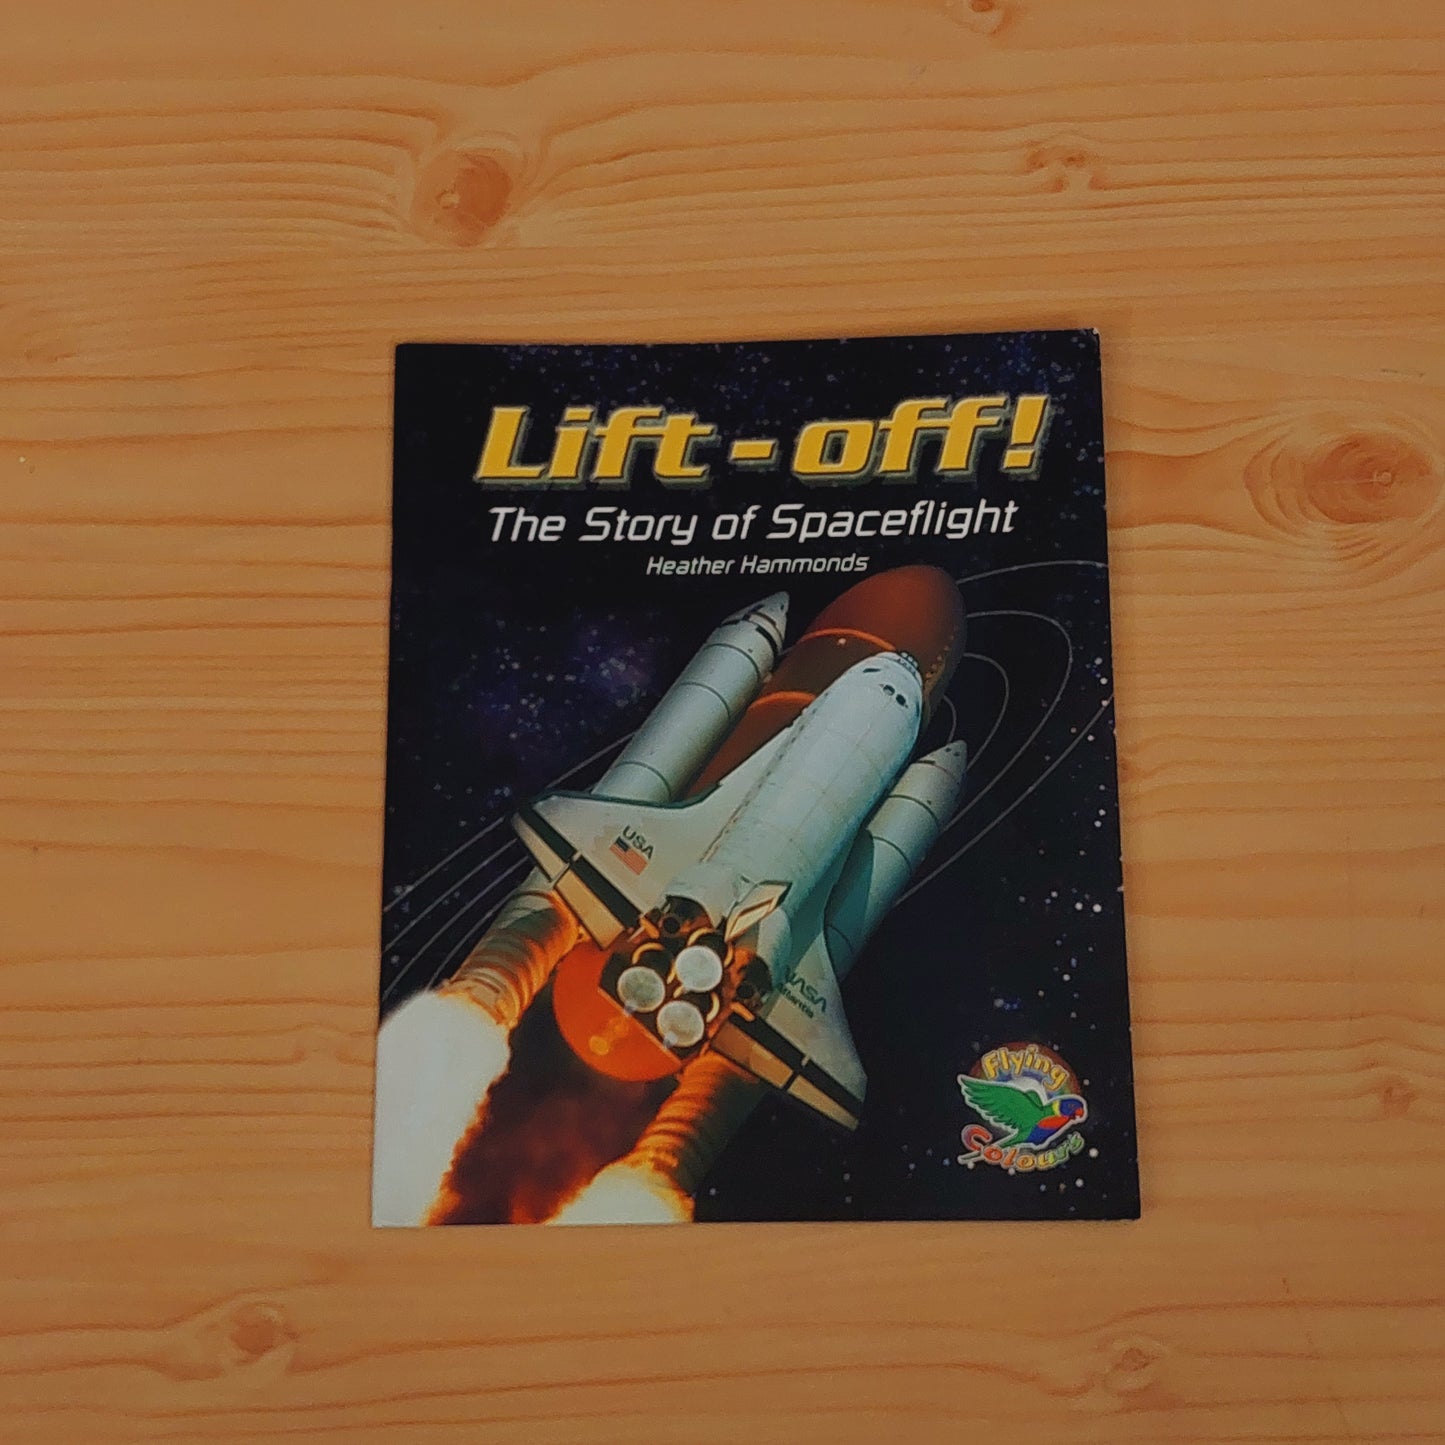 Lift-off! The Story of Spaceflight